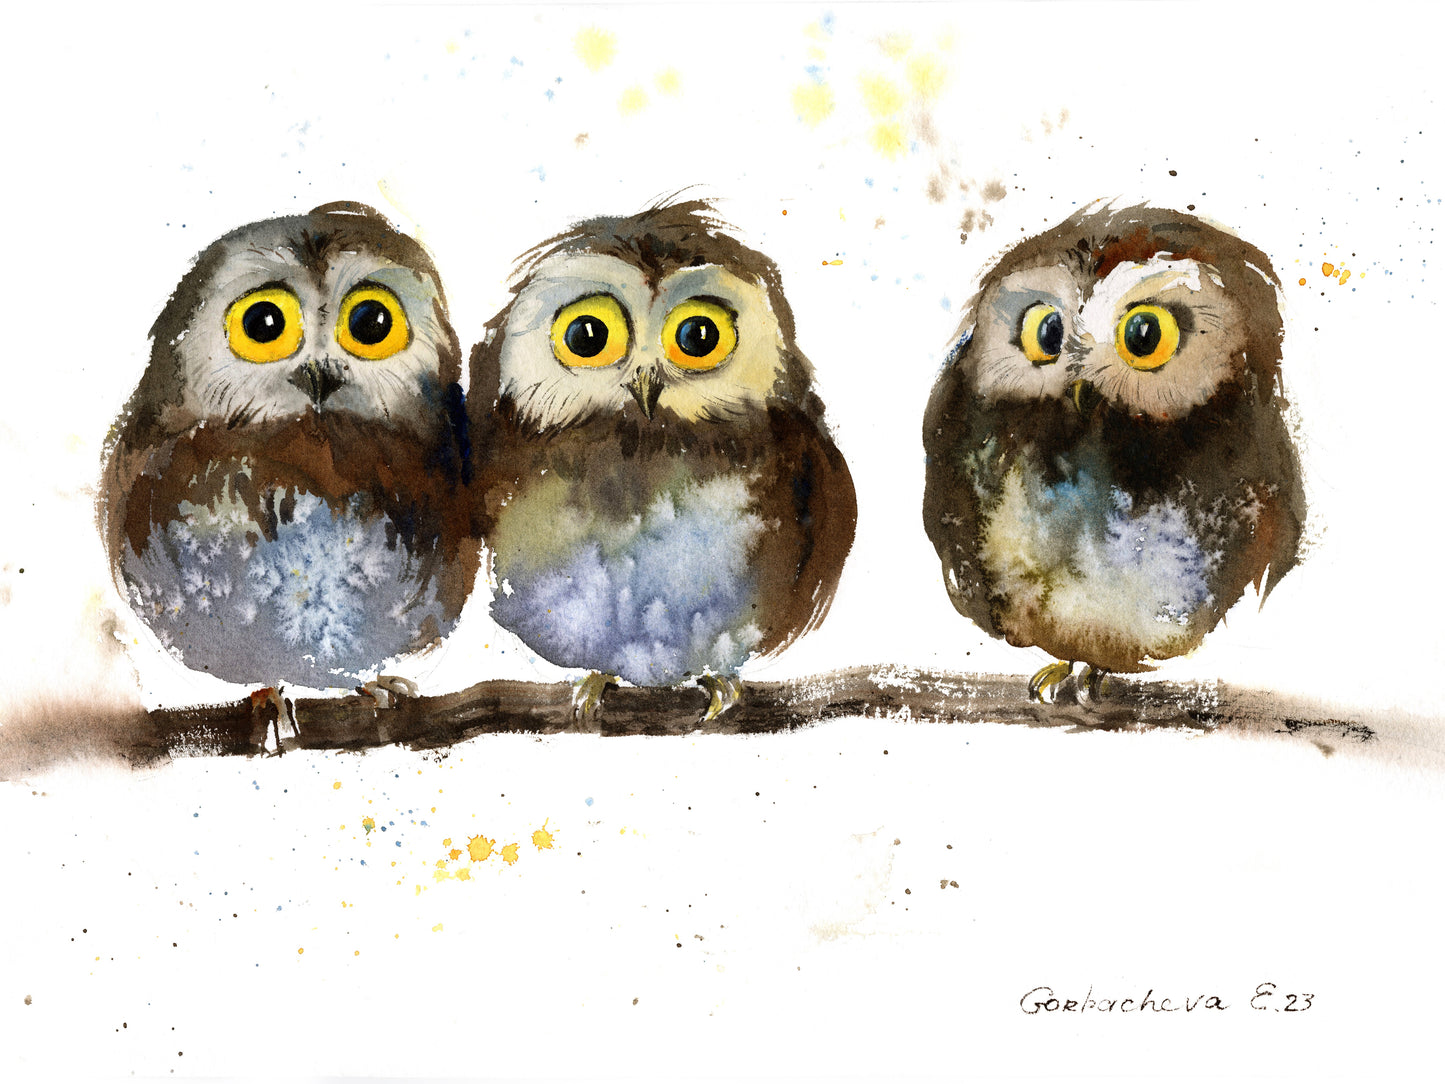 Whimsical Owl Trio Art Print - Colorful Watercolor Painting